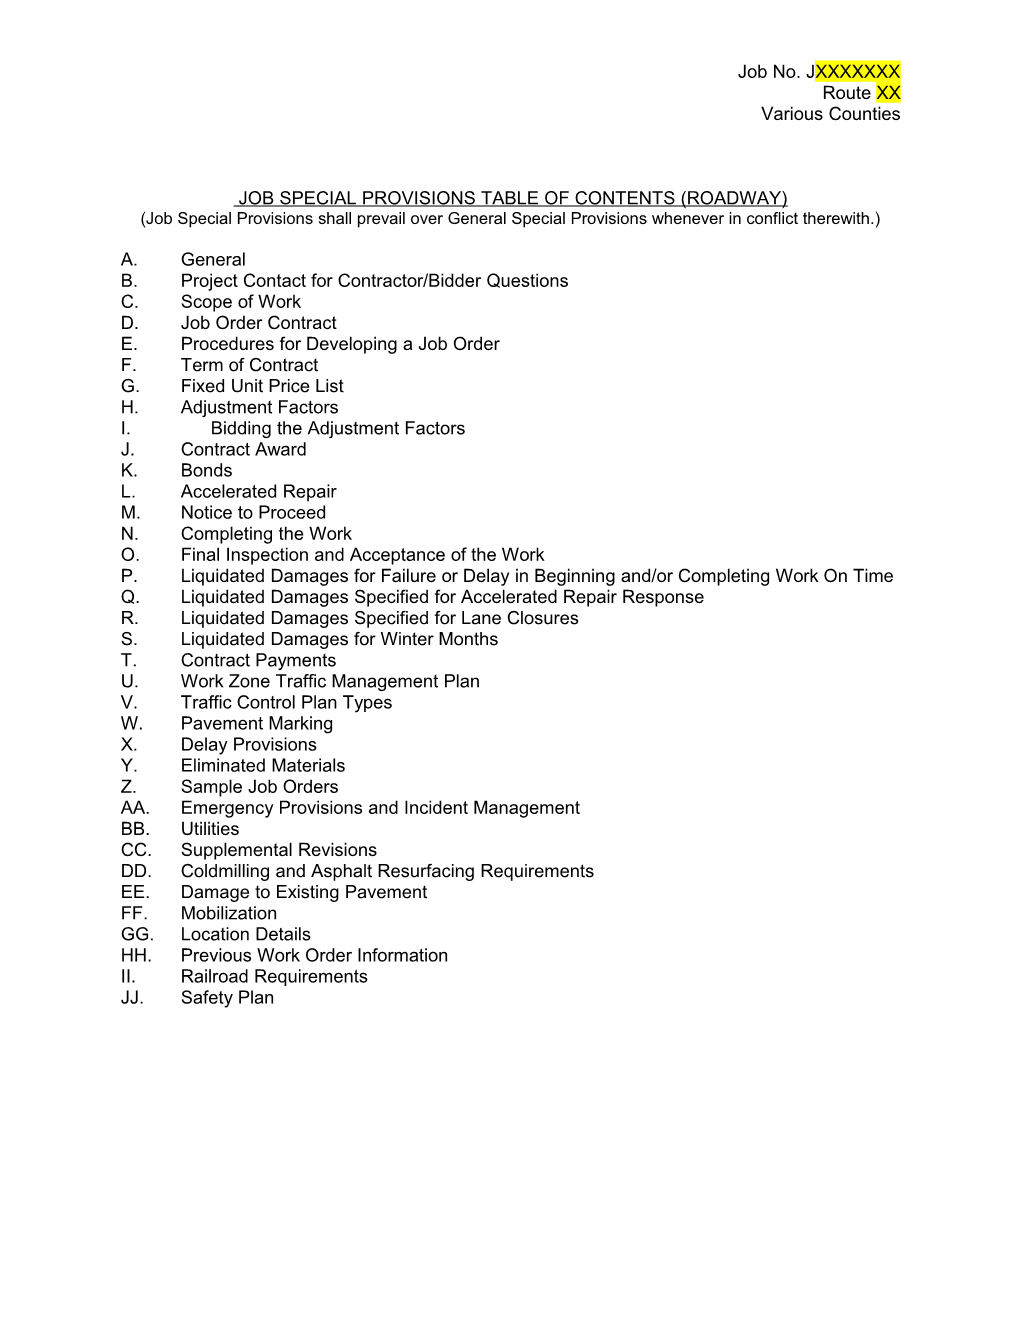 Job Special Provisions Table of Contents (Roadway) s3